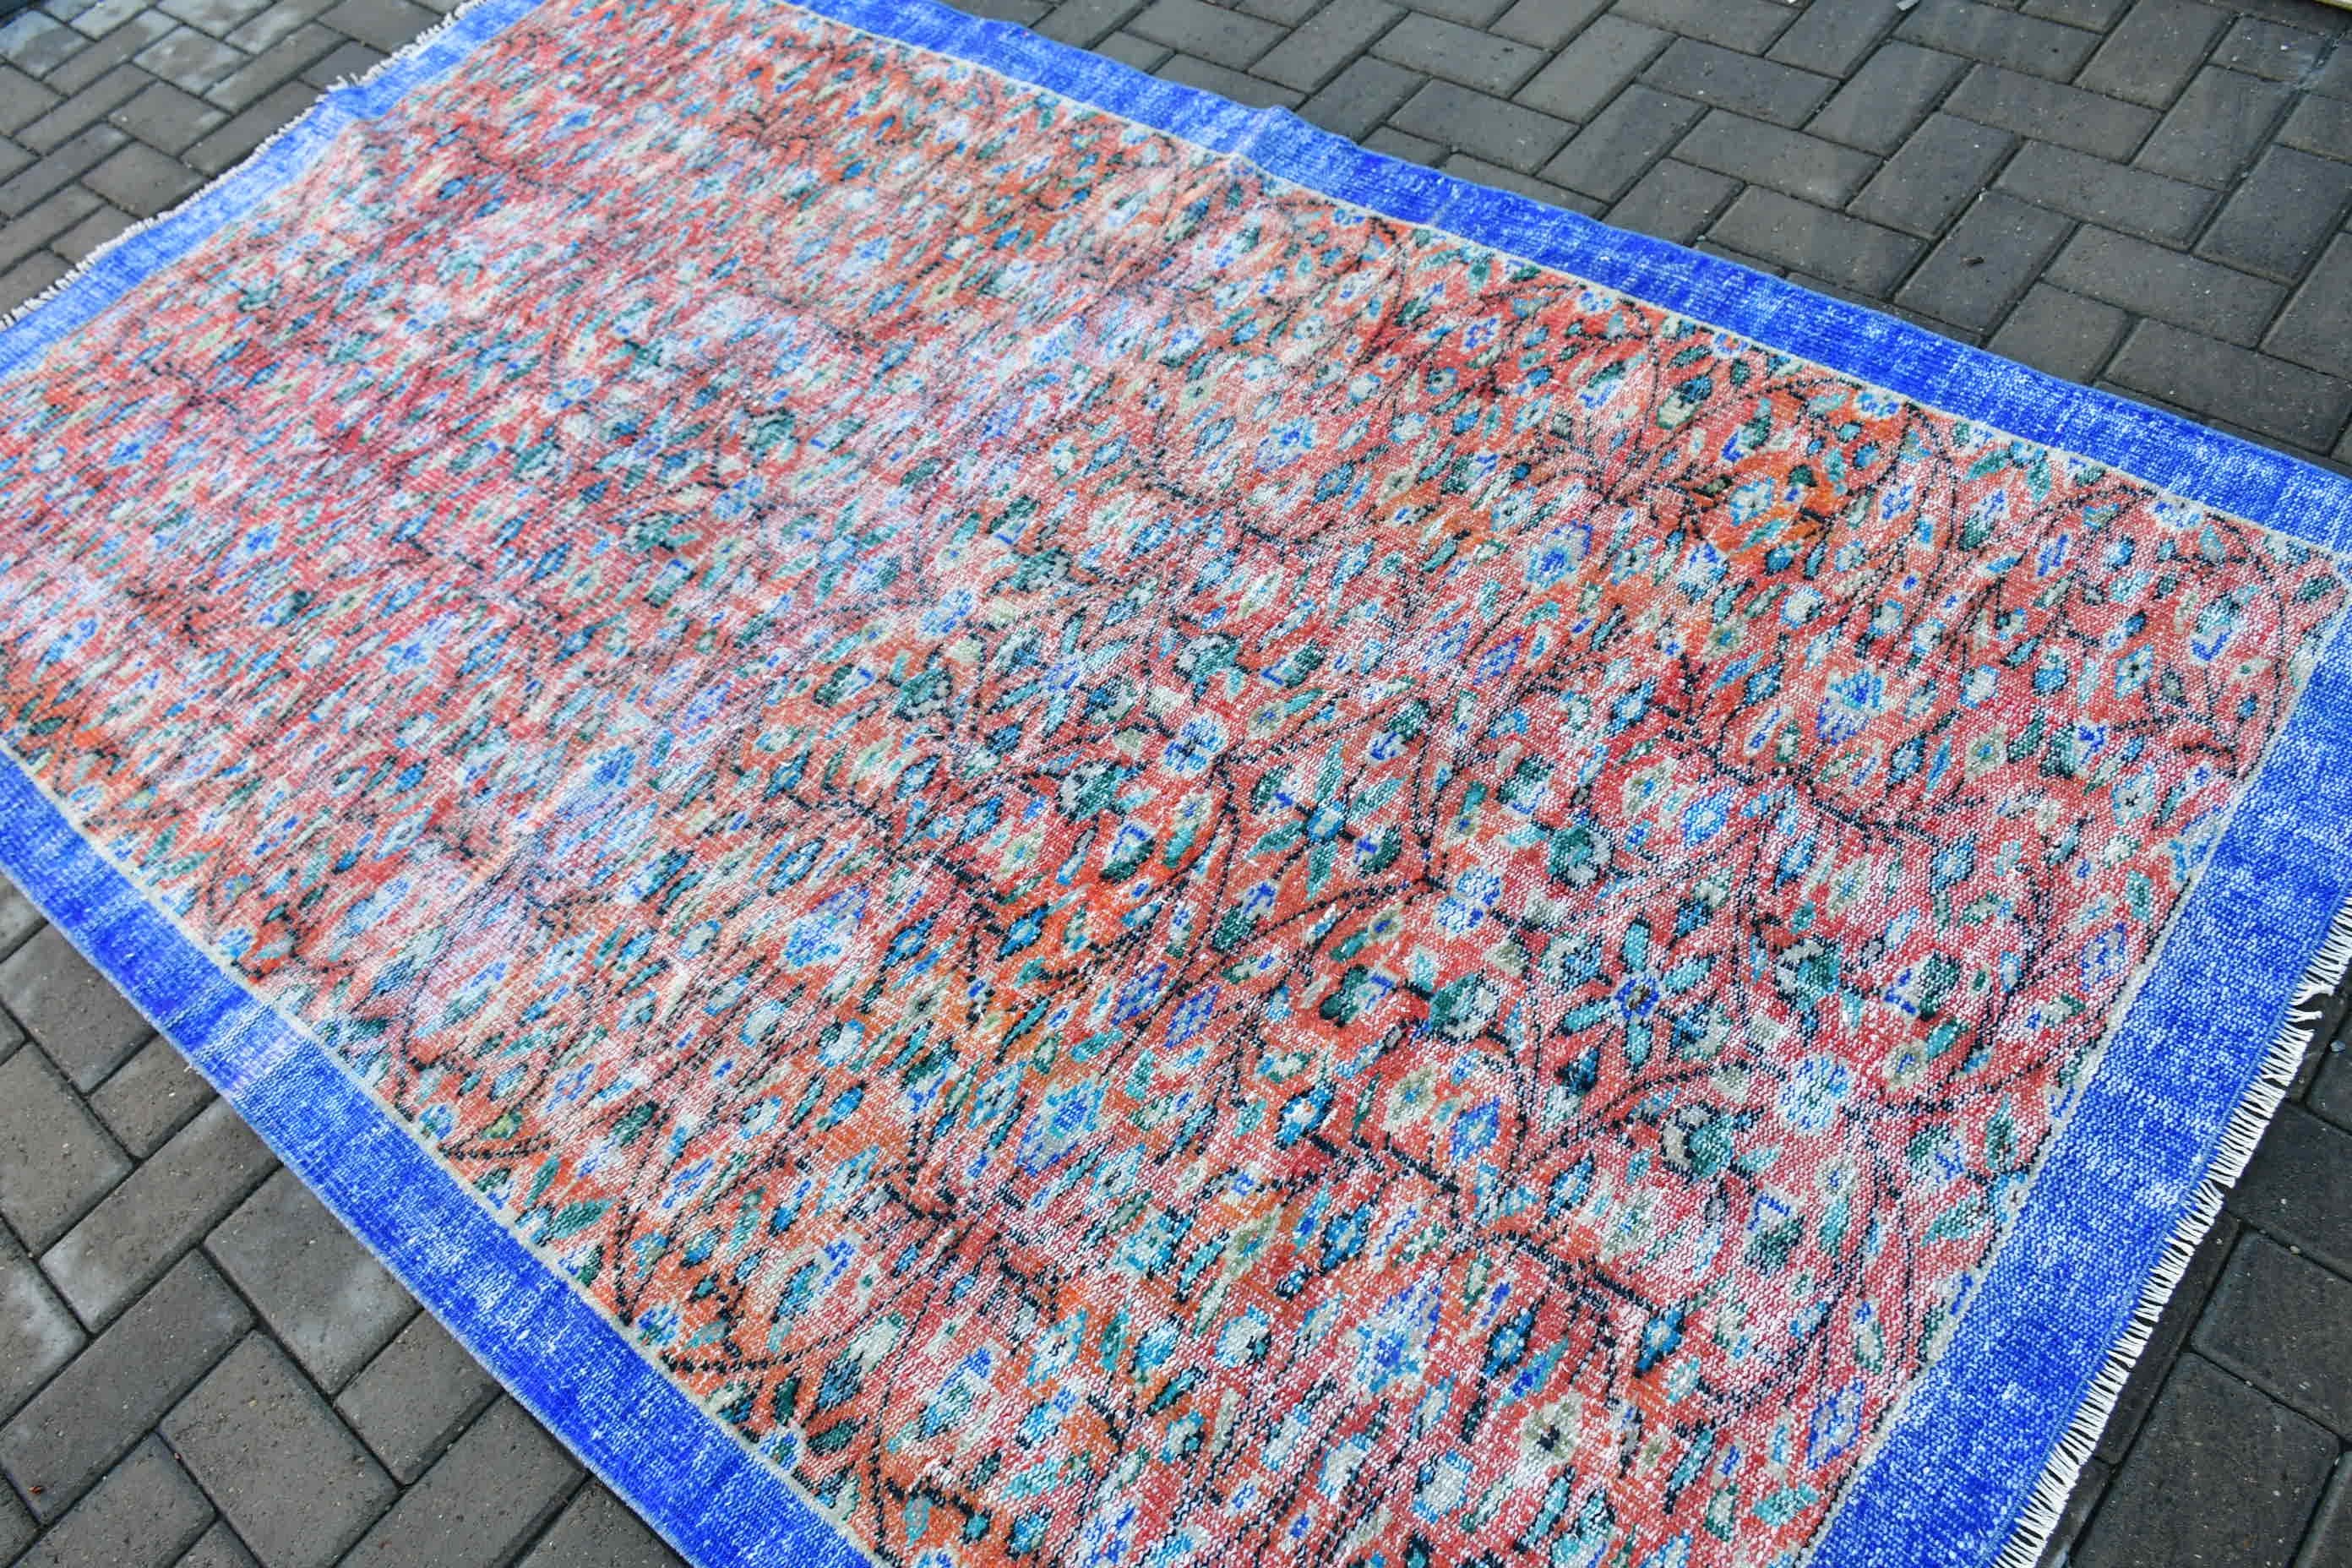 Kitchen Rug, Vintage Rug, Turkish Rugs, Rugs for Kitchen, Red Wool Rugs, Hand Knotted Rugs, Bright Rug, Moroccan Rug, 4.8x8.1 ft Area Rug